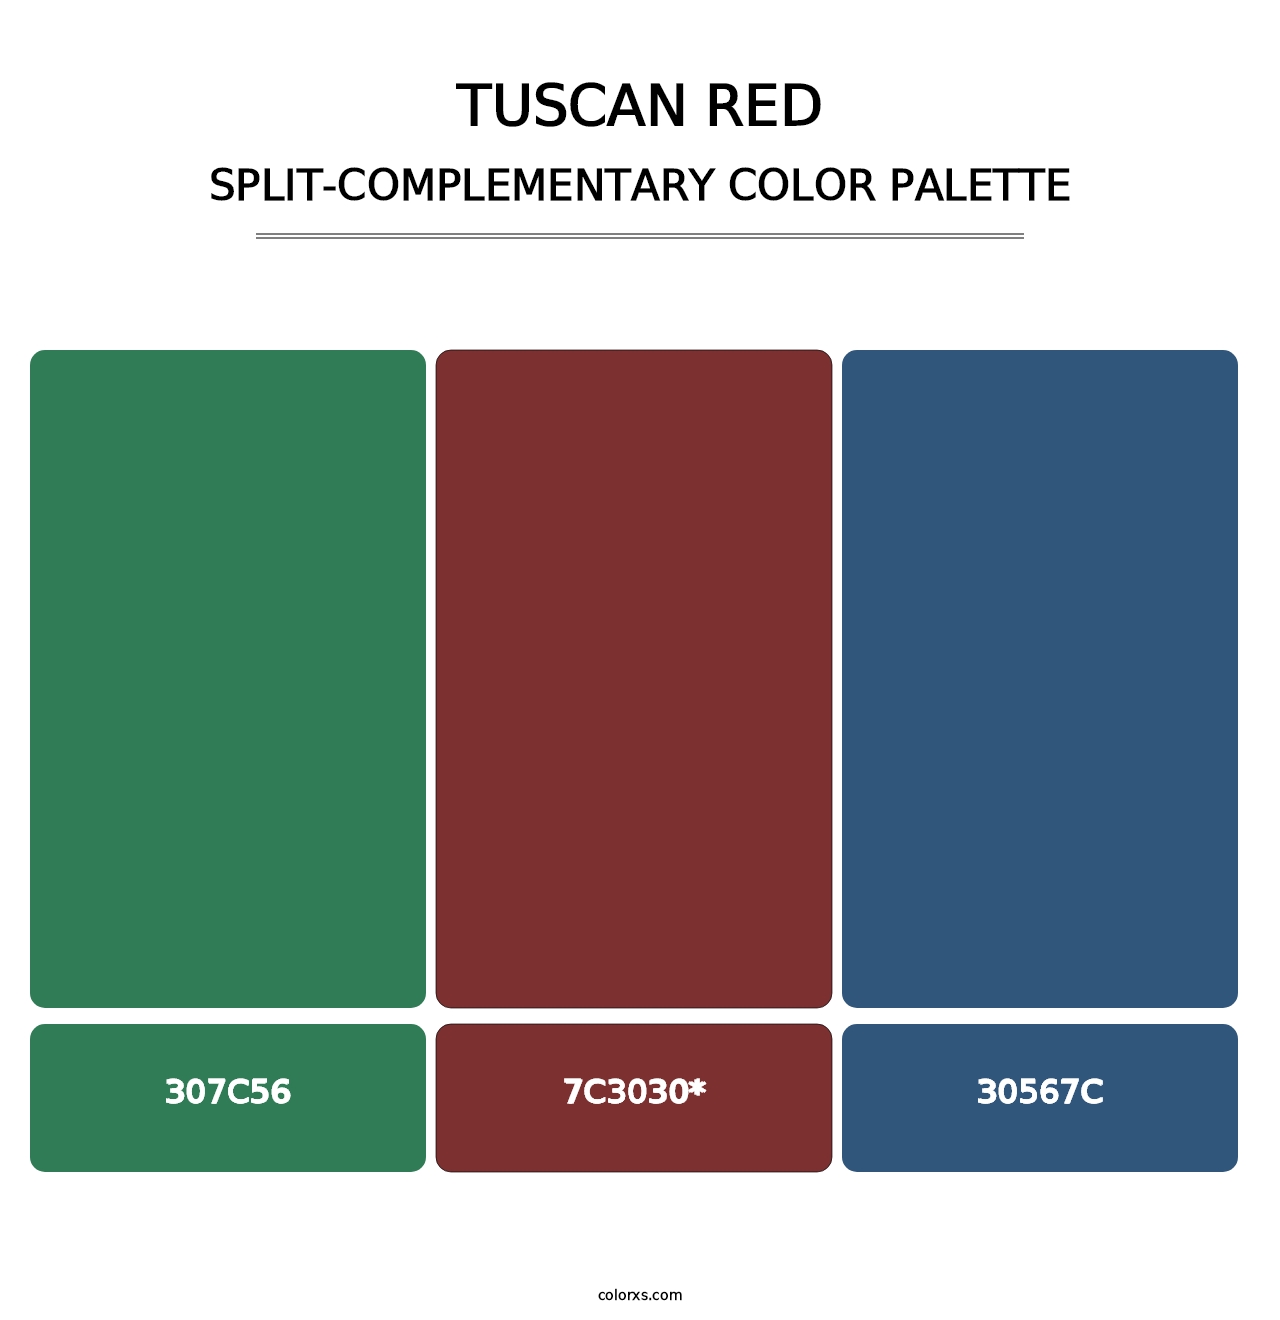 Tuscan Red - Split-Complementary Color Palette